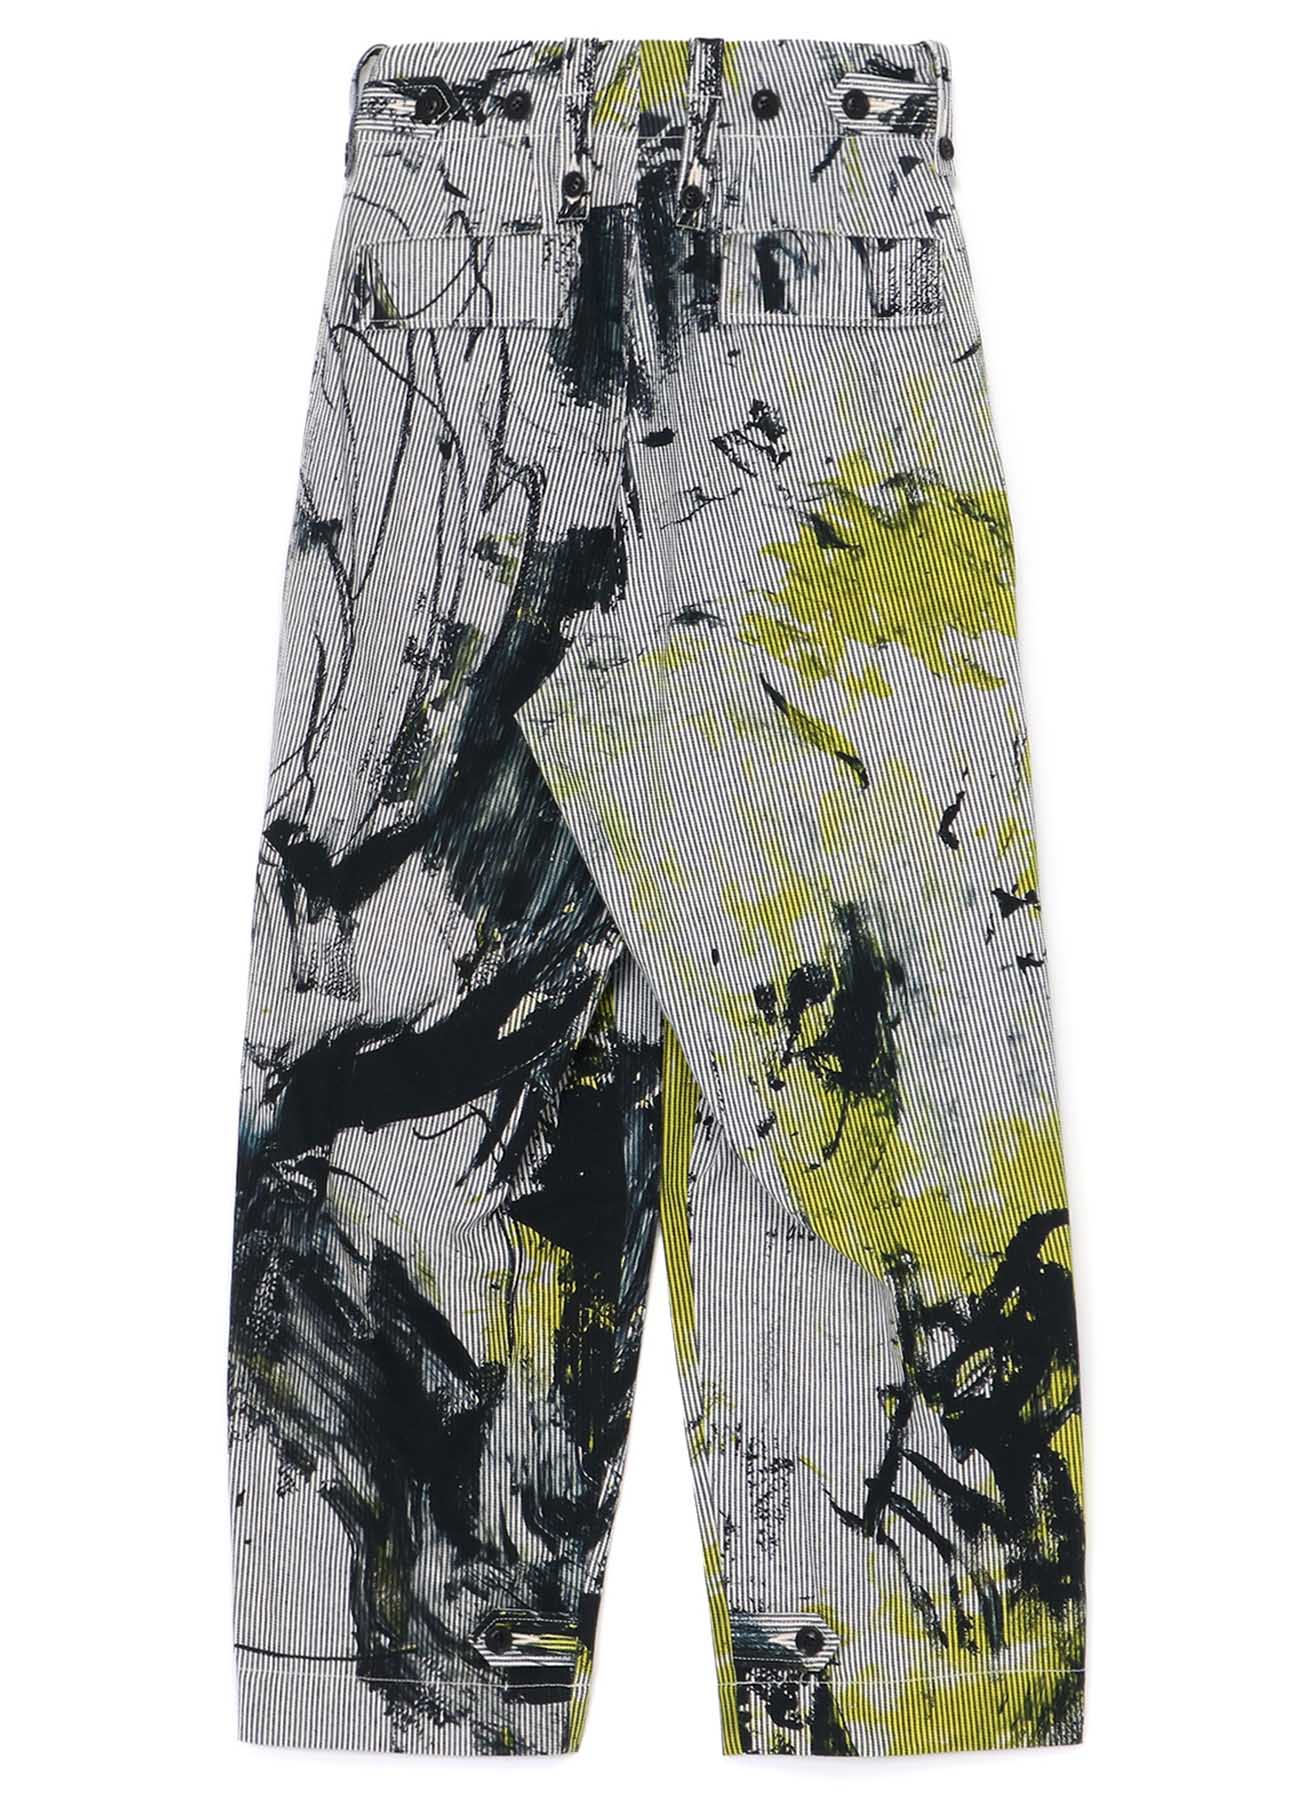 COTTON HICKORY ABSTRACT PAINT LEFT POCKET PANTS